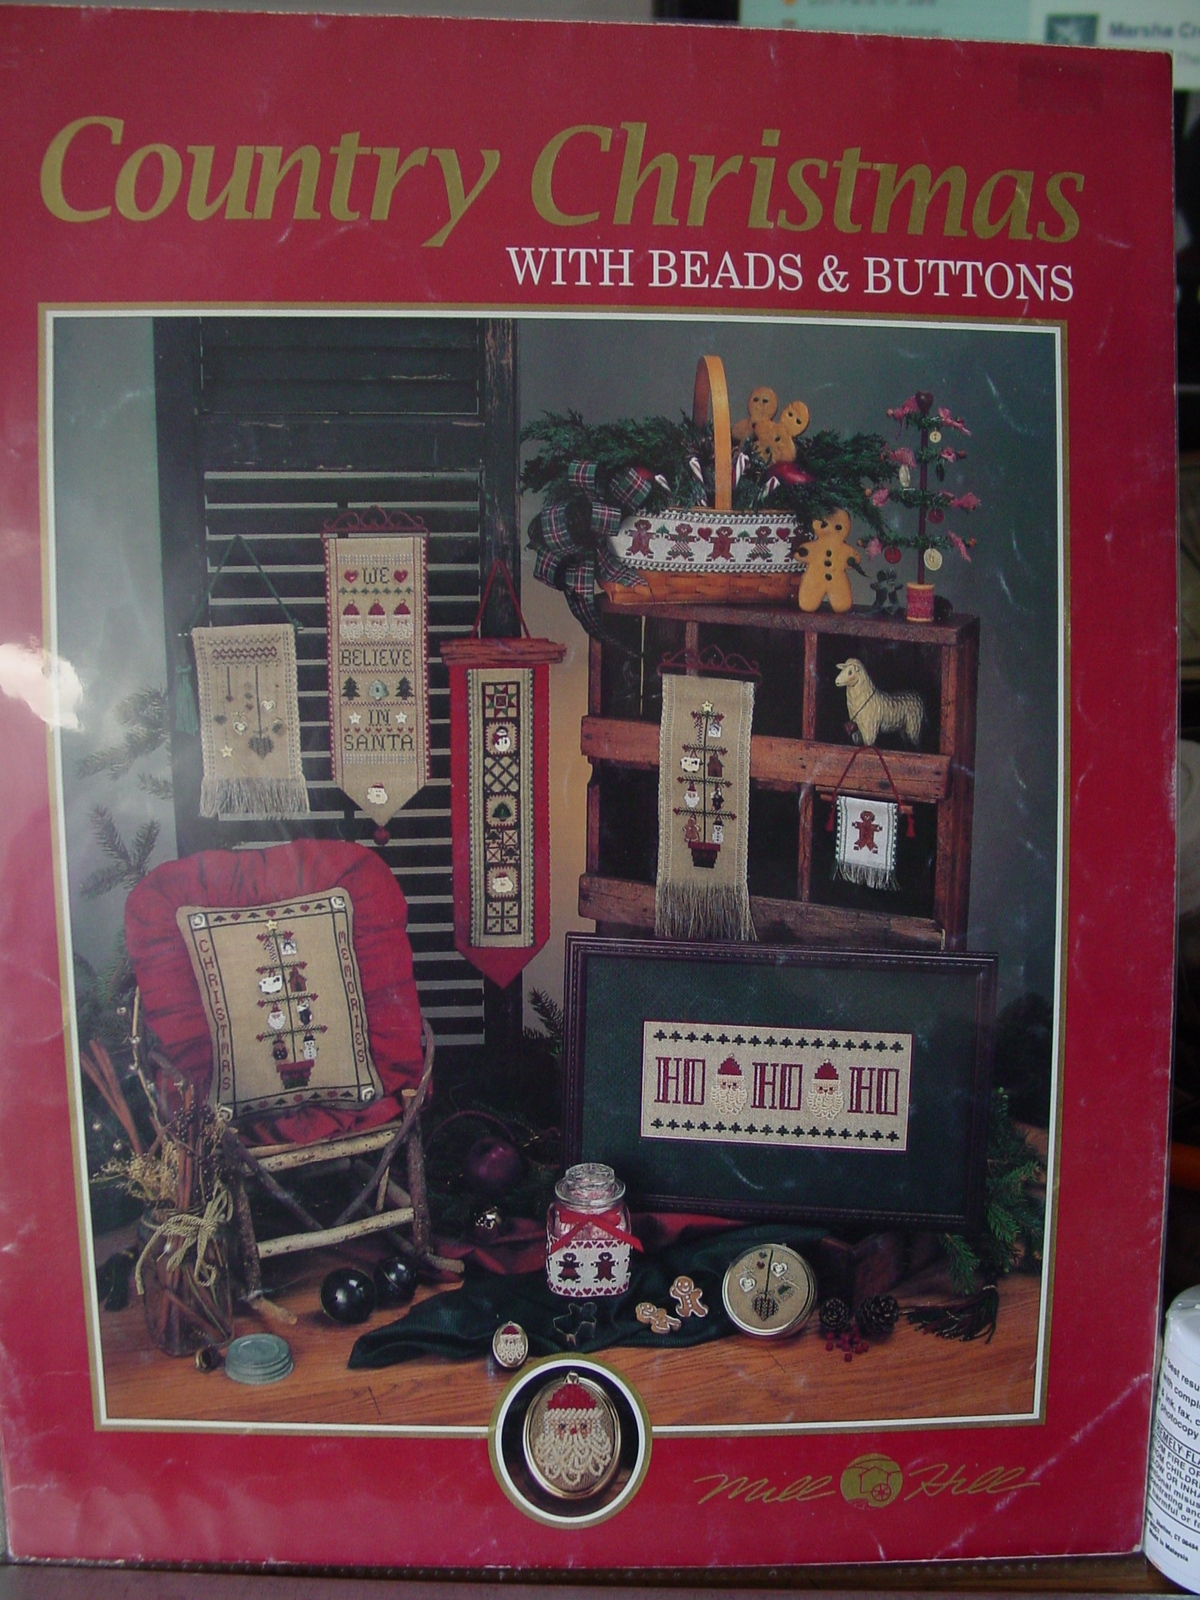 Cross Stitch Pattern Leaflet "Country Christmas" w/Buttons & Beads - $3.99